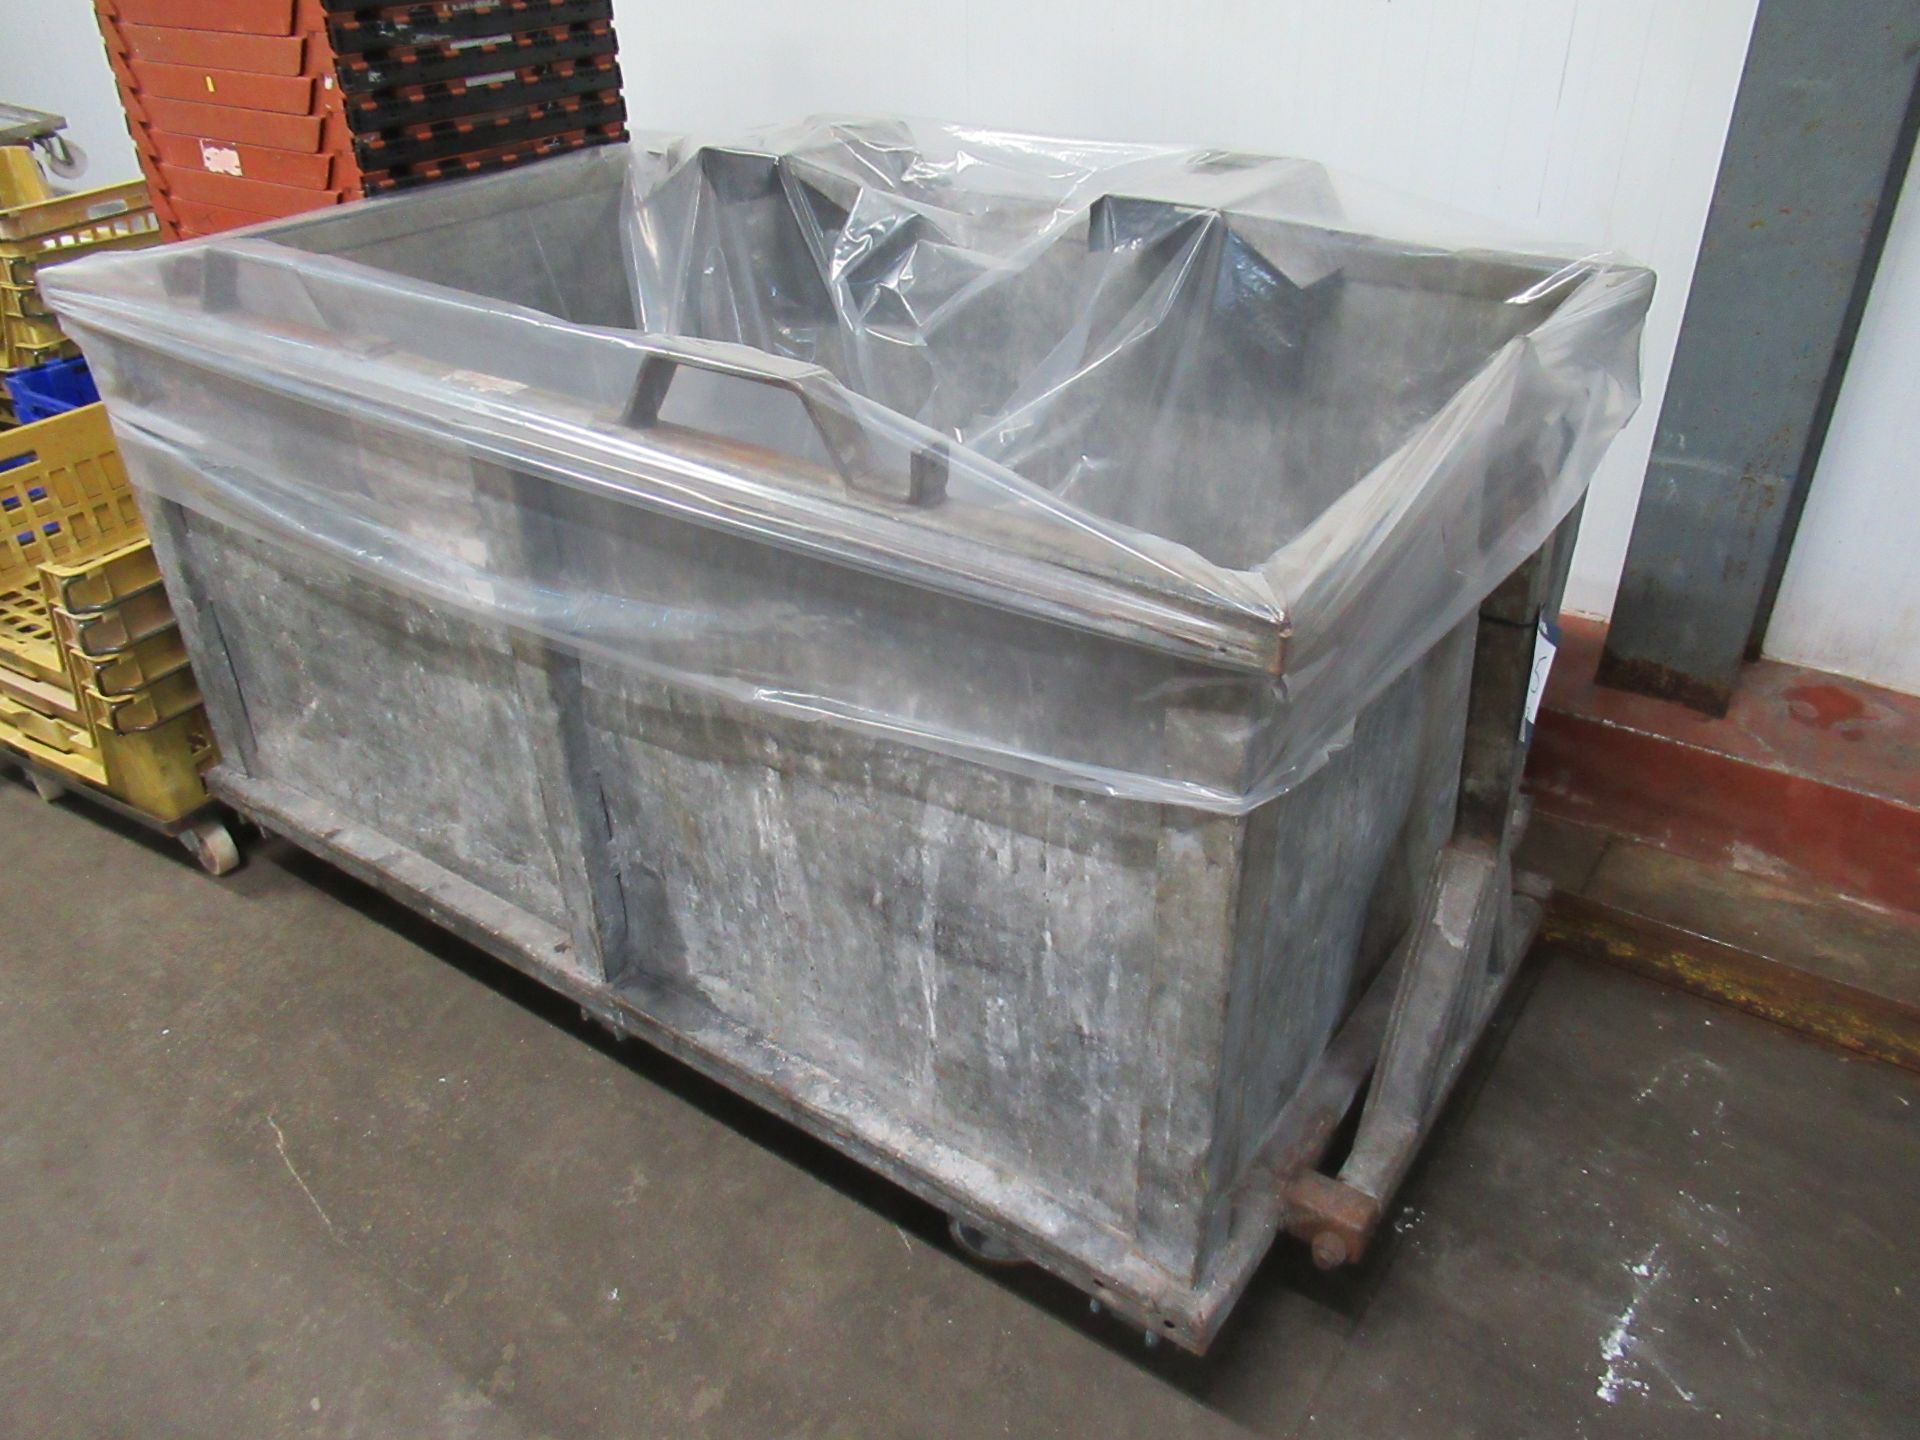 3 Galvanised mobile four wheel waste bins, 1600 x 950 x 750mm high with fold down draw bar - Image 4 of 7